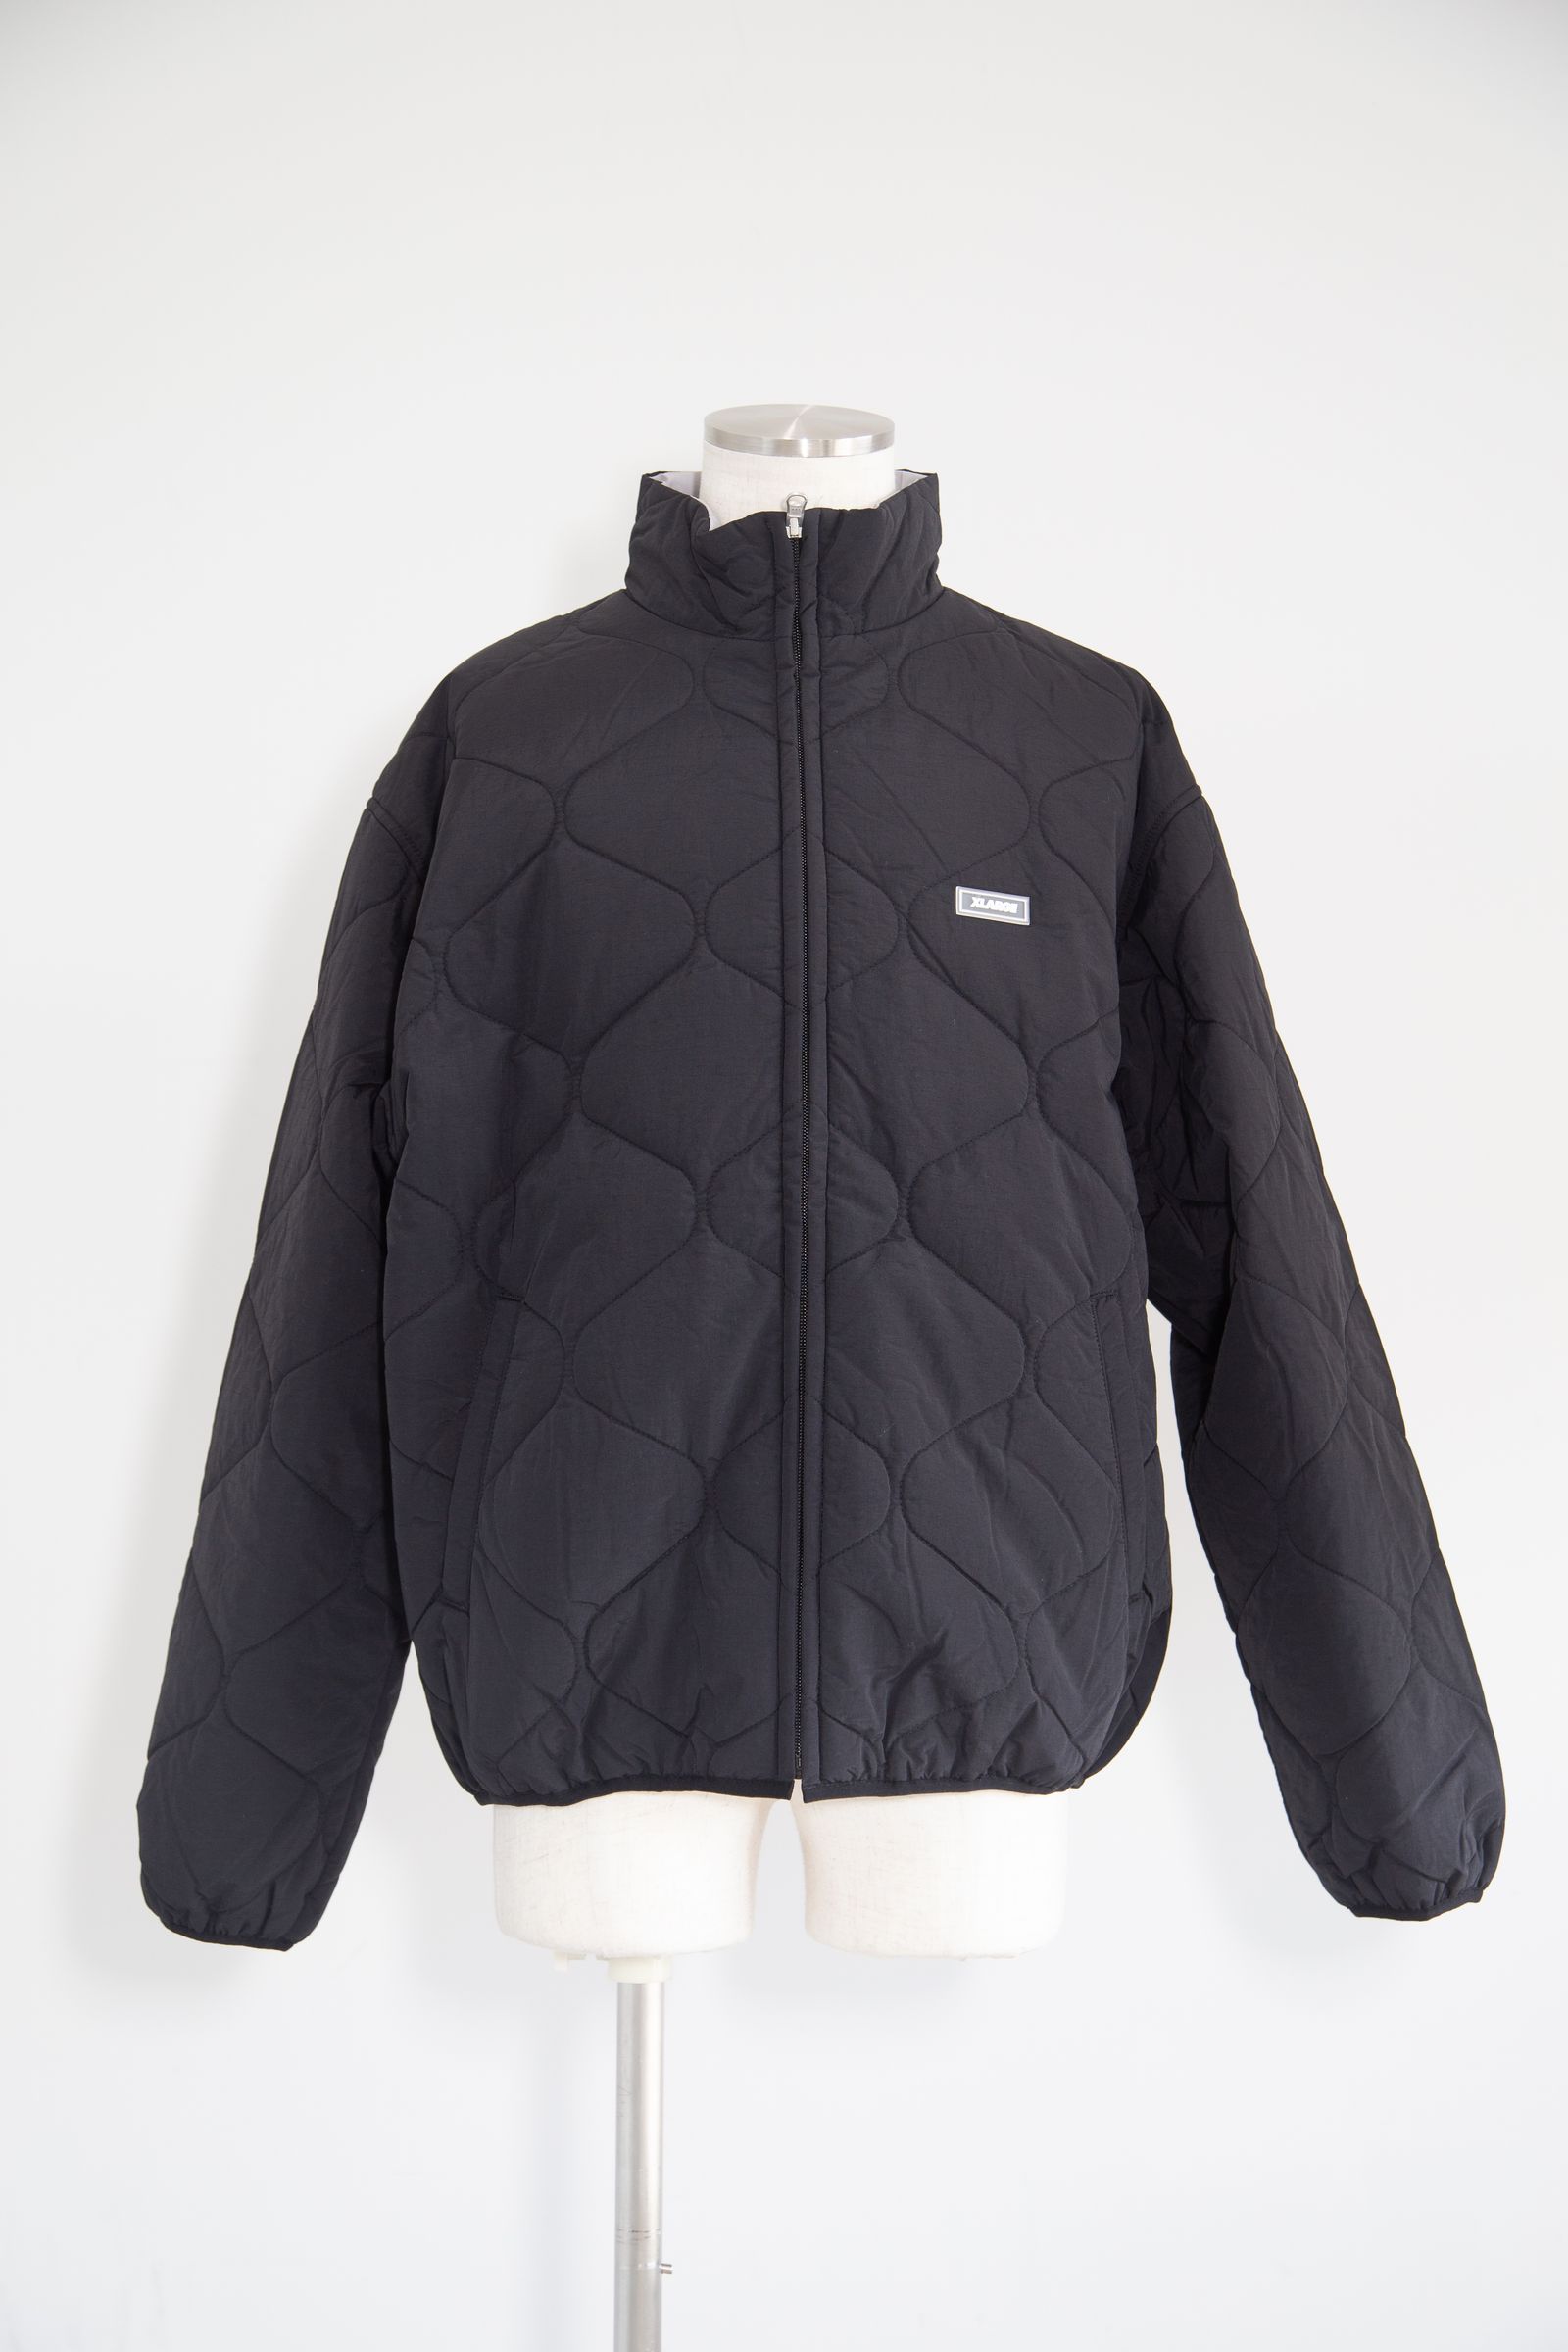 XLARGE - REVERSIBLE QUILTED JACKET / ネイビー | Tempt